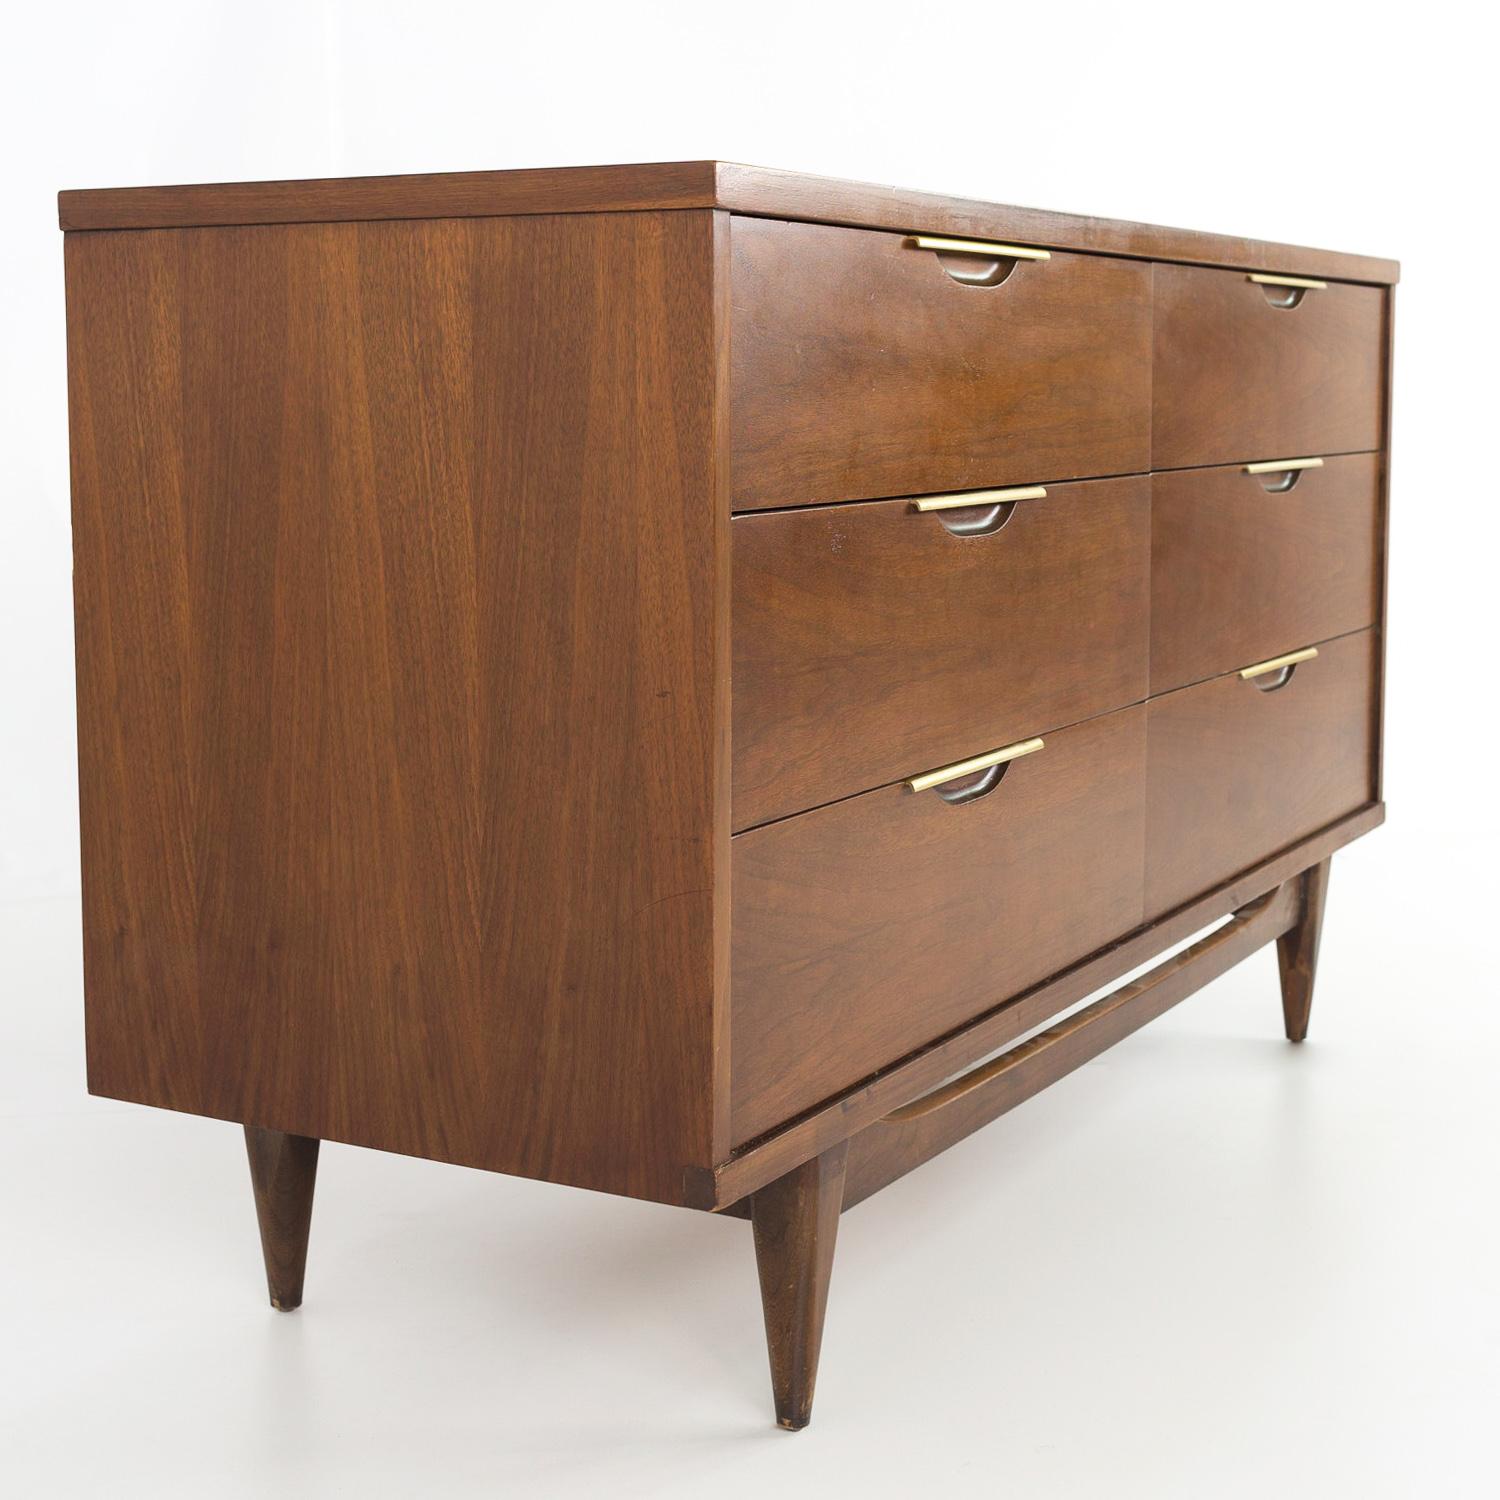 Kent Coffey tableau mid century walnut 6 drawer lowboy dresser
This dresser is 56 long x 19 wide x 31.25 inches high

All pieces of furniture can be had in what we call restored vintage condition. That means the piece is restored upon purchase so